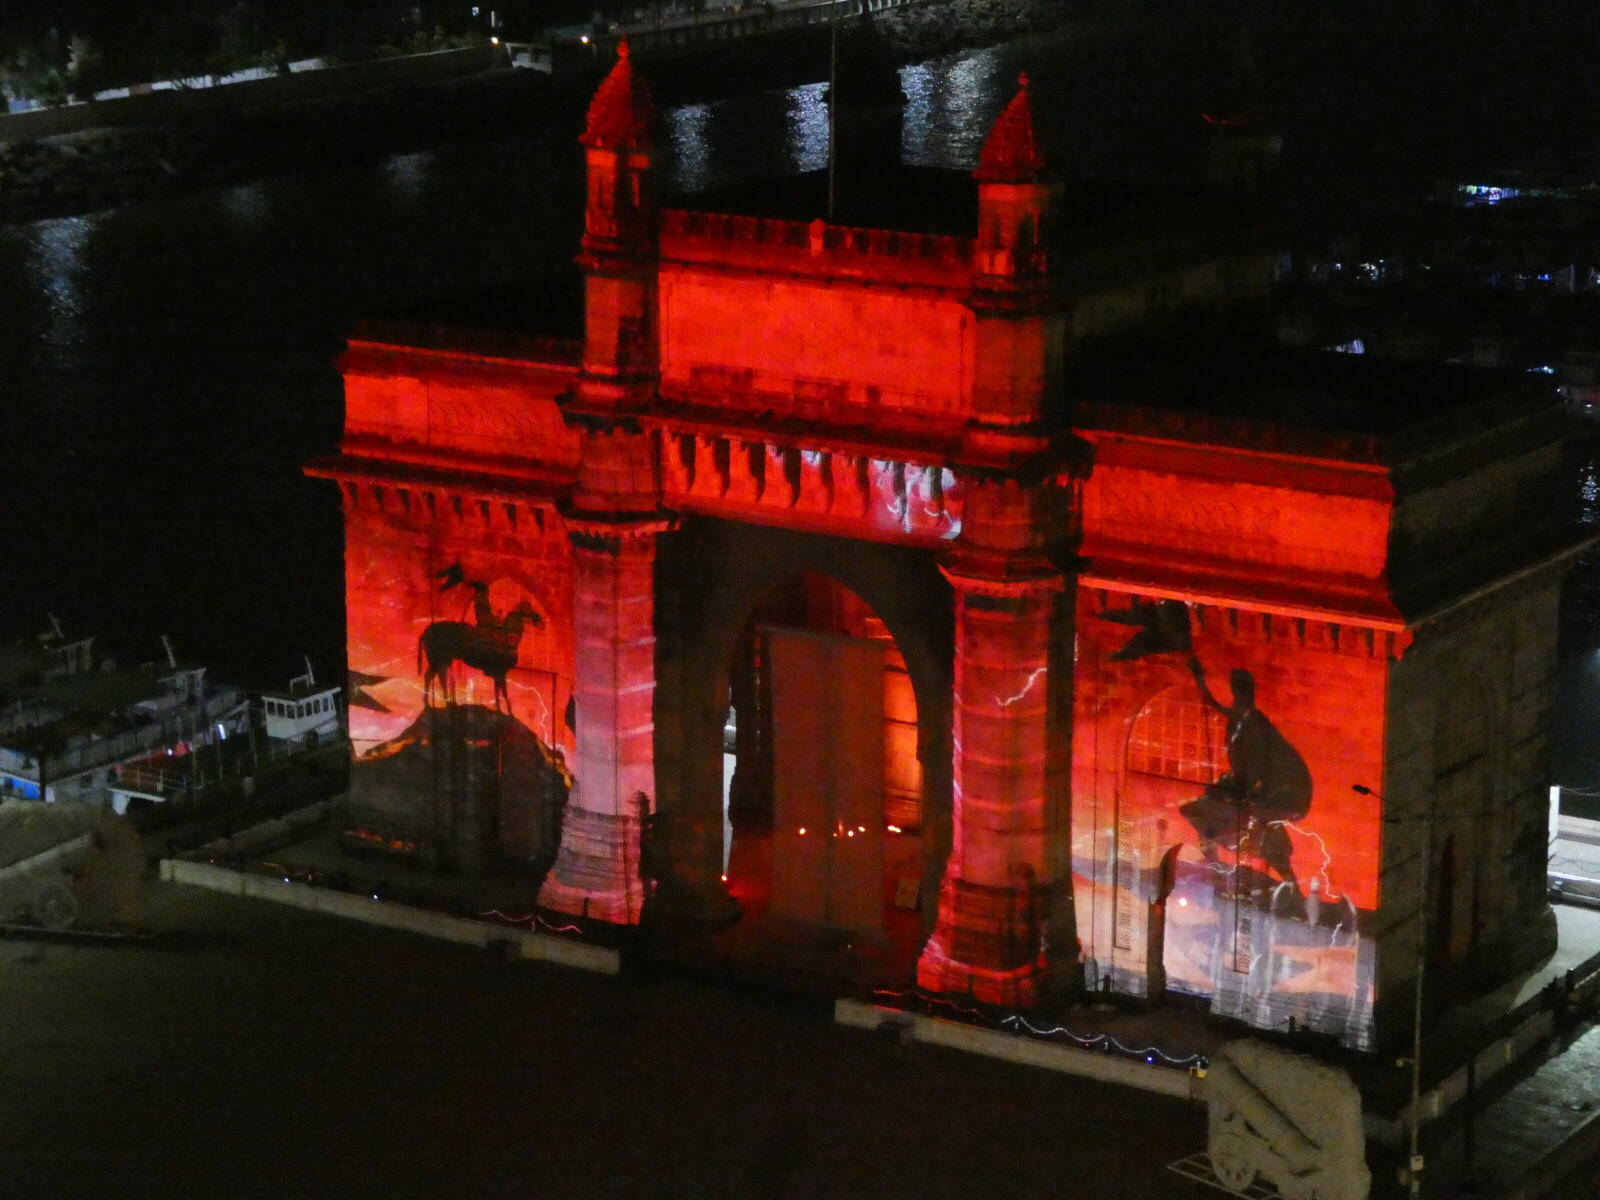 Son et lumiere on the Gateway of India, Bombay